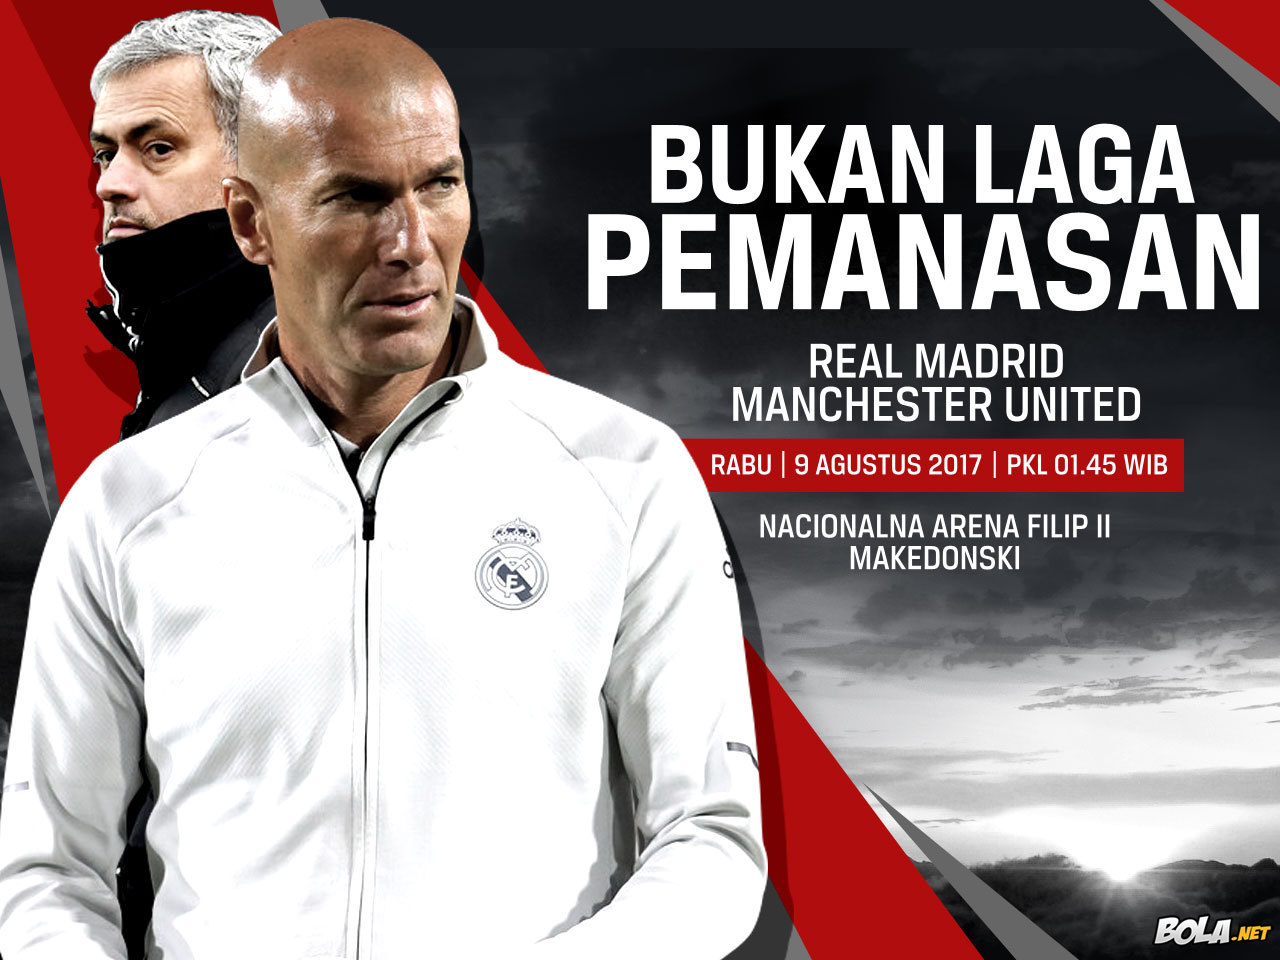 Download Wallpaper Real Madrid Vs Manchester United Bolanet